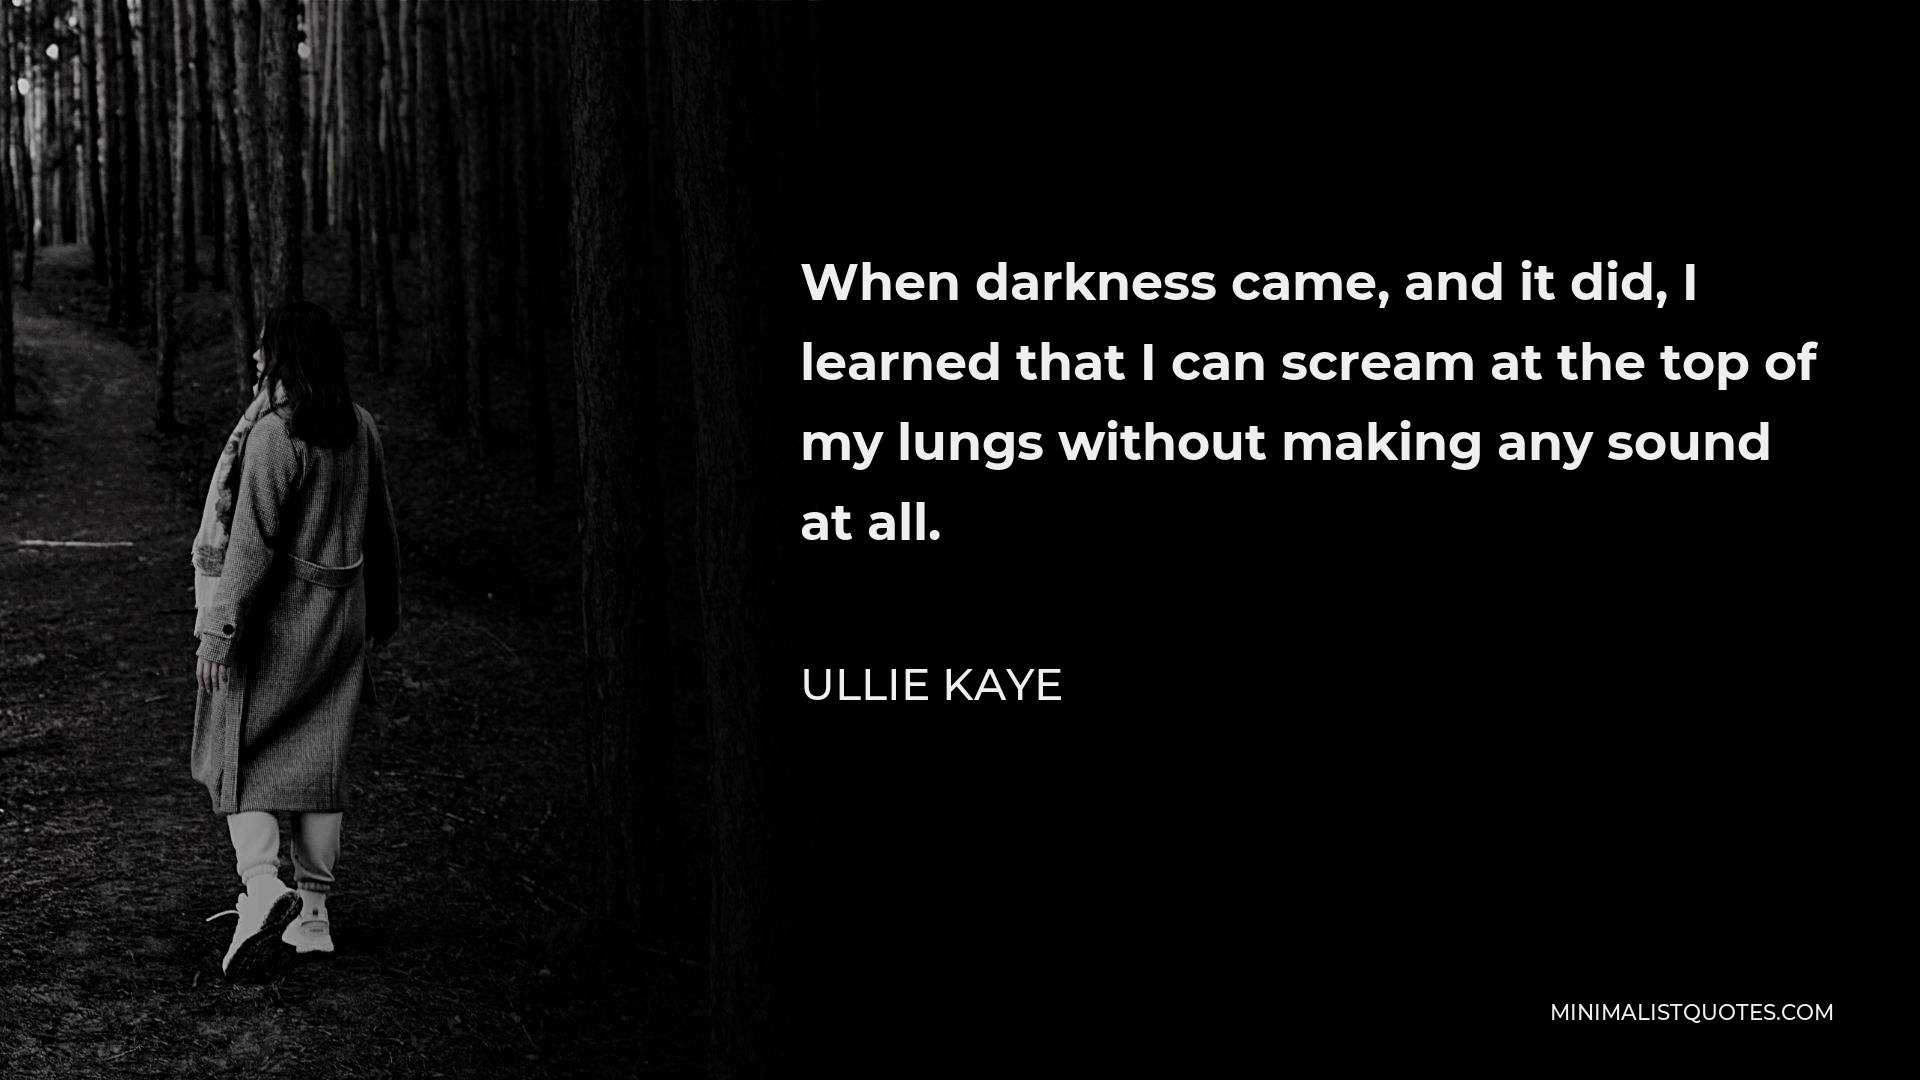 Ullie Kaye Quote - When darkness came, and it did, I learned that I can scream at the top of my lungs without making any sound at all.